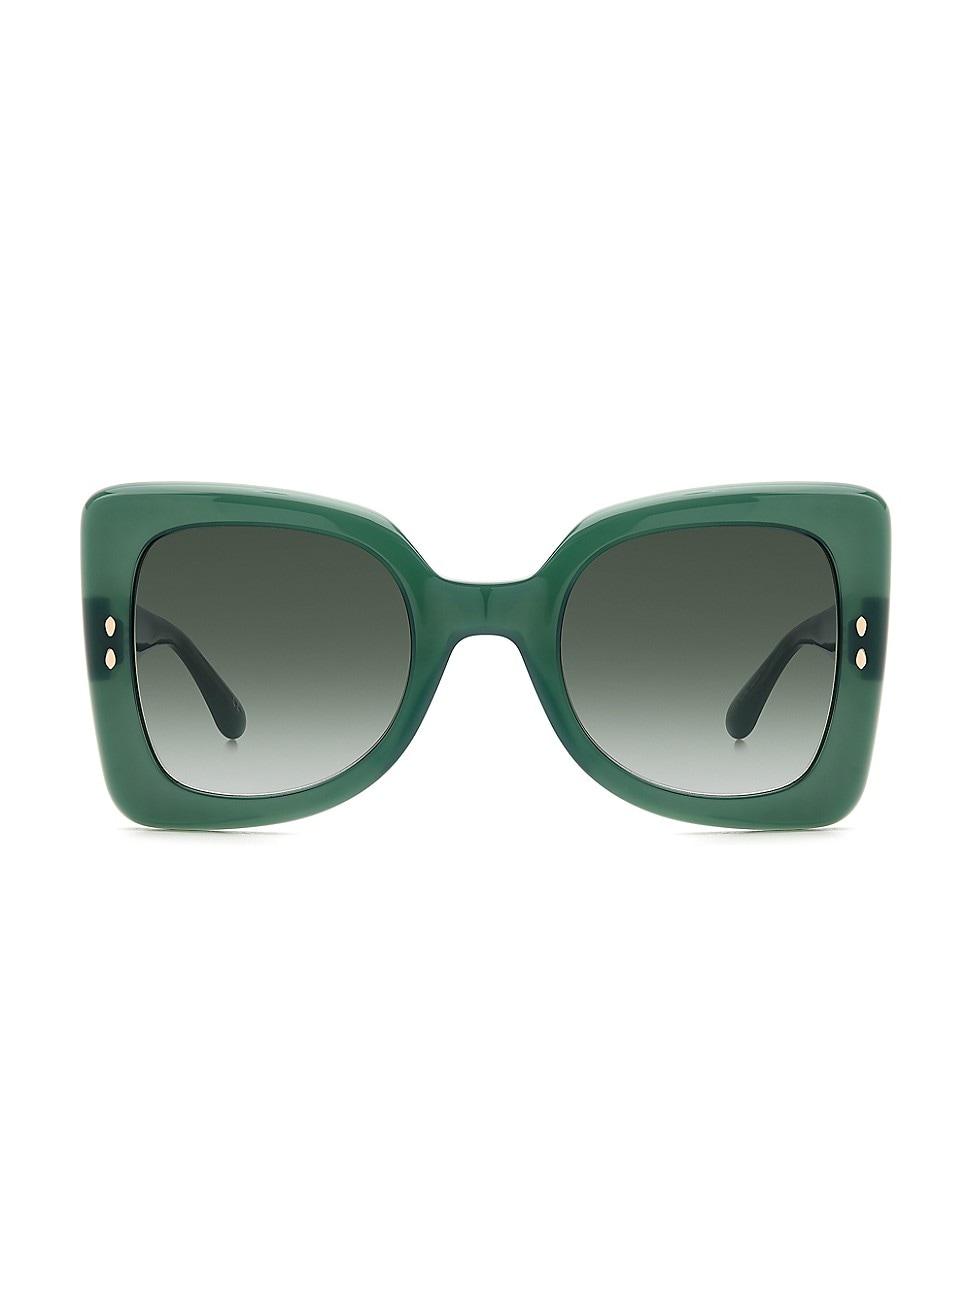 Isabel Marant 60mm Oversized Square Sunglasses in Green | Lyst